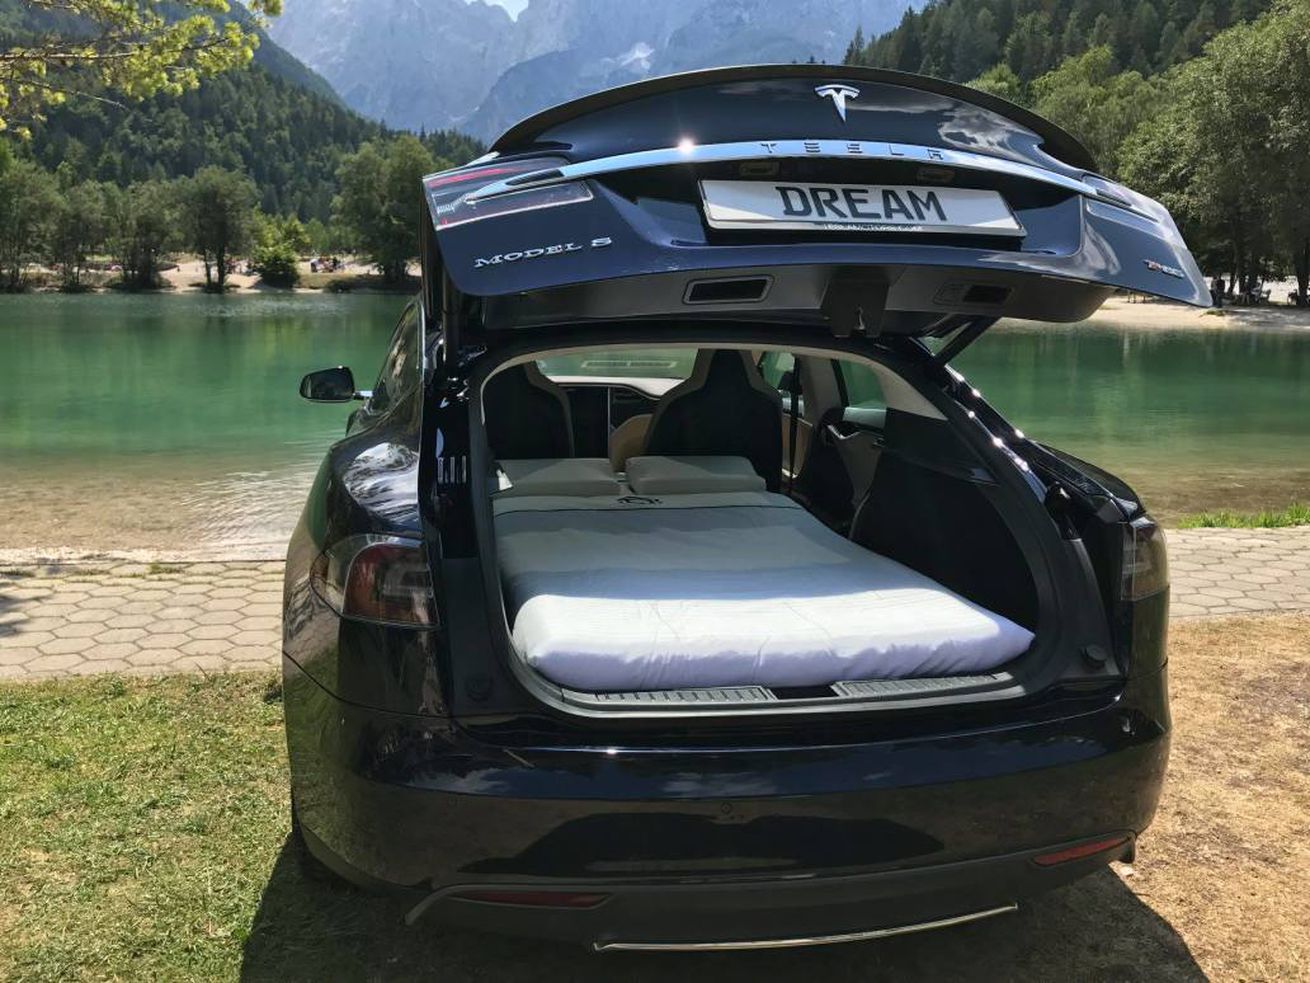 Turn a Tesla into a camper with $700 bedding set